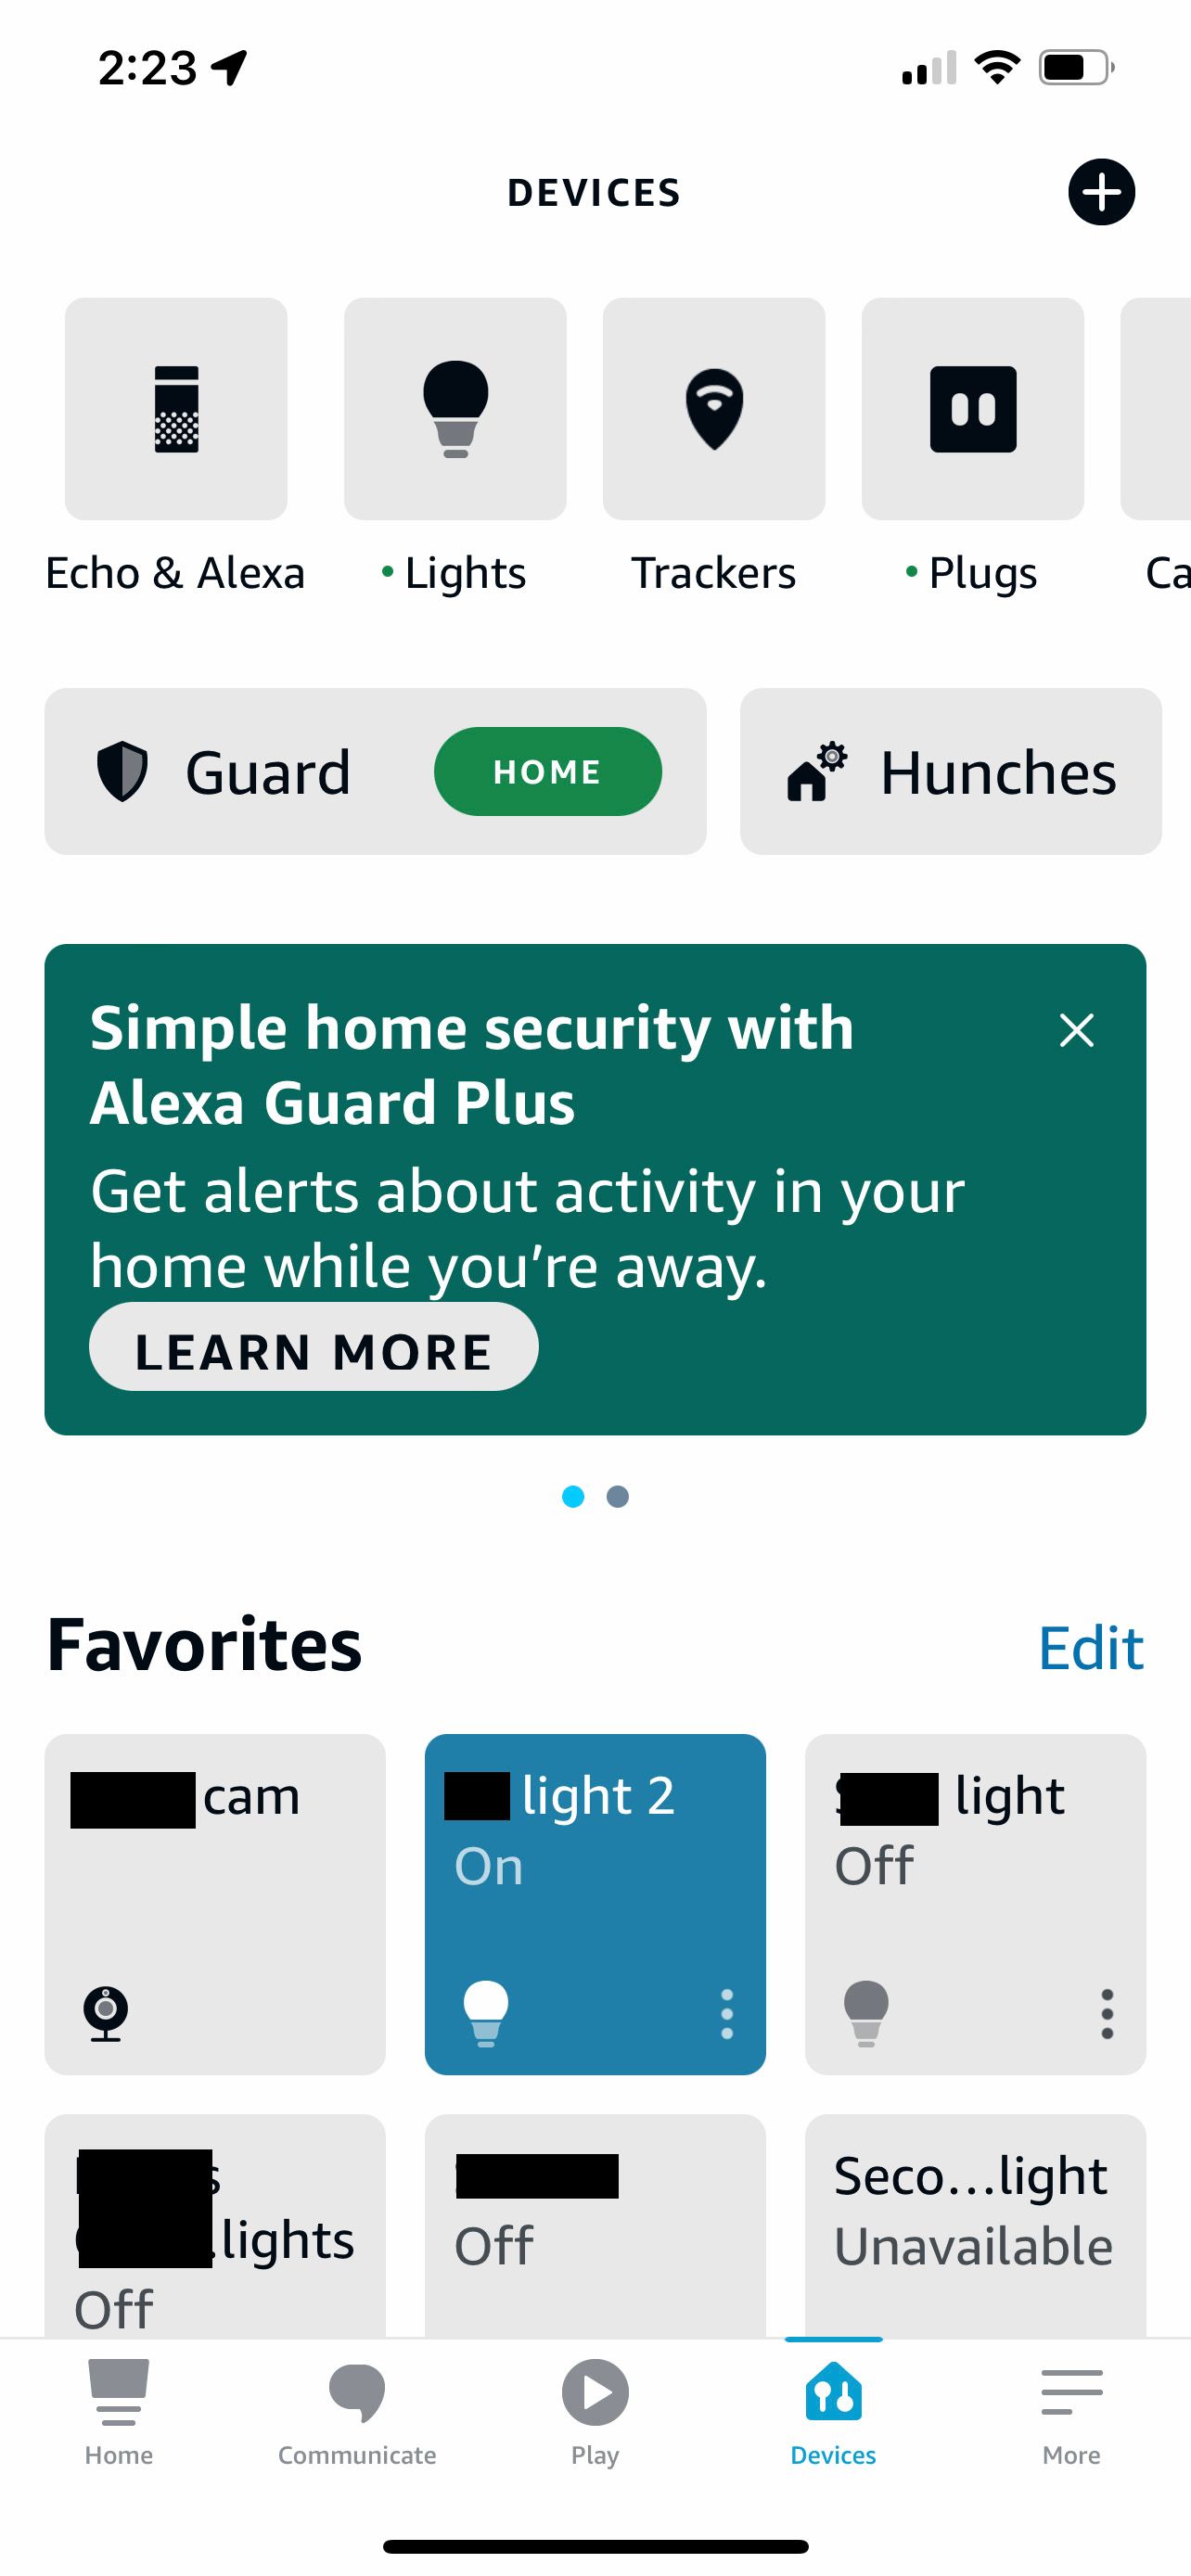 The devices page in the Alexa app